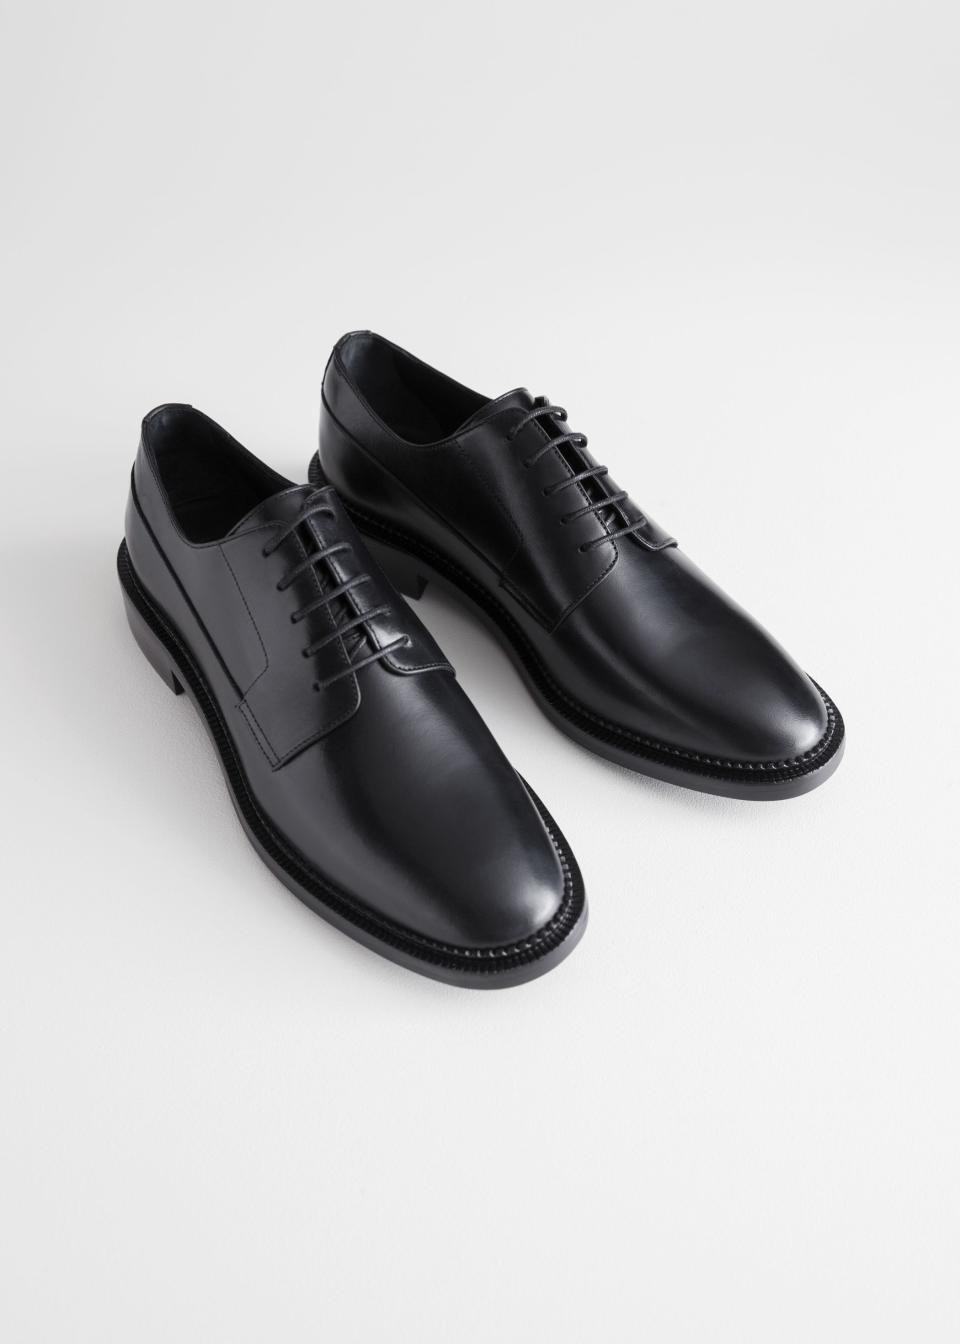 & Other Stories Leather Oxfords